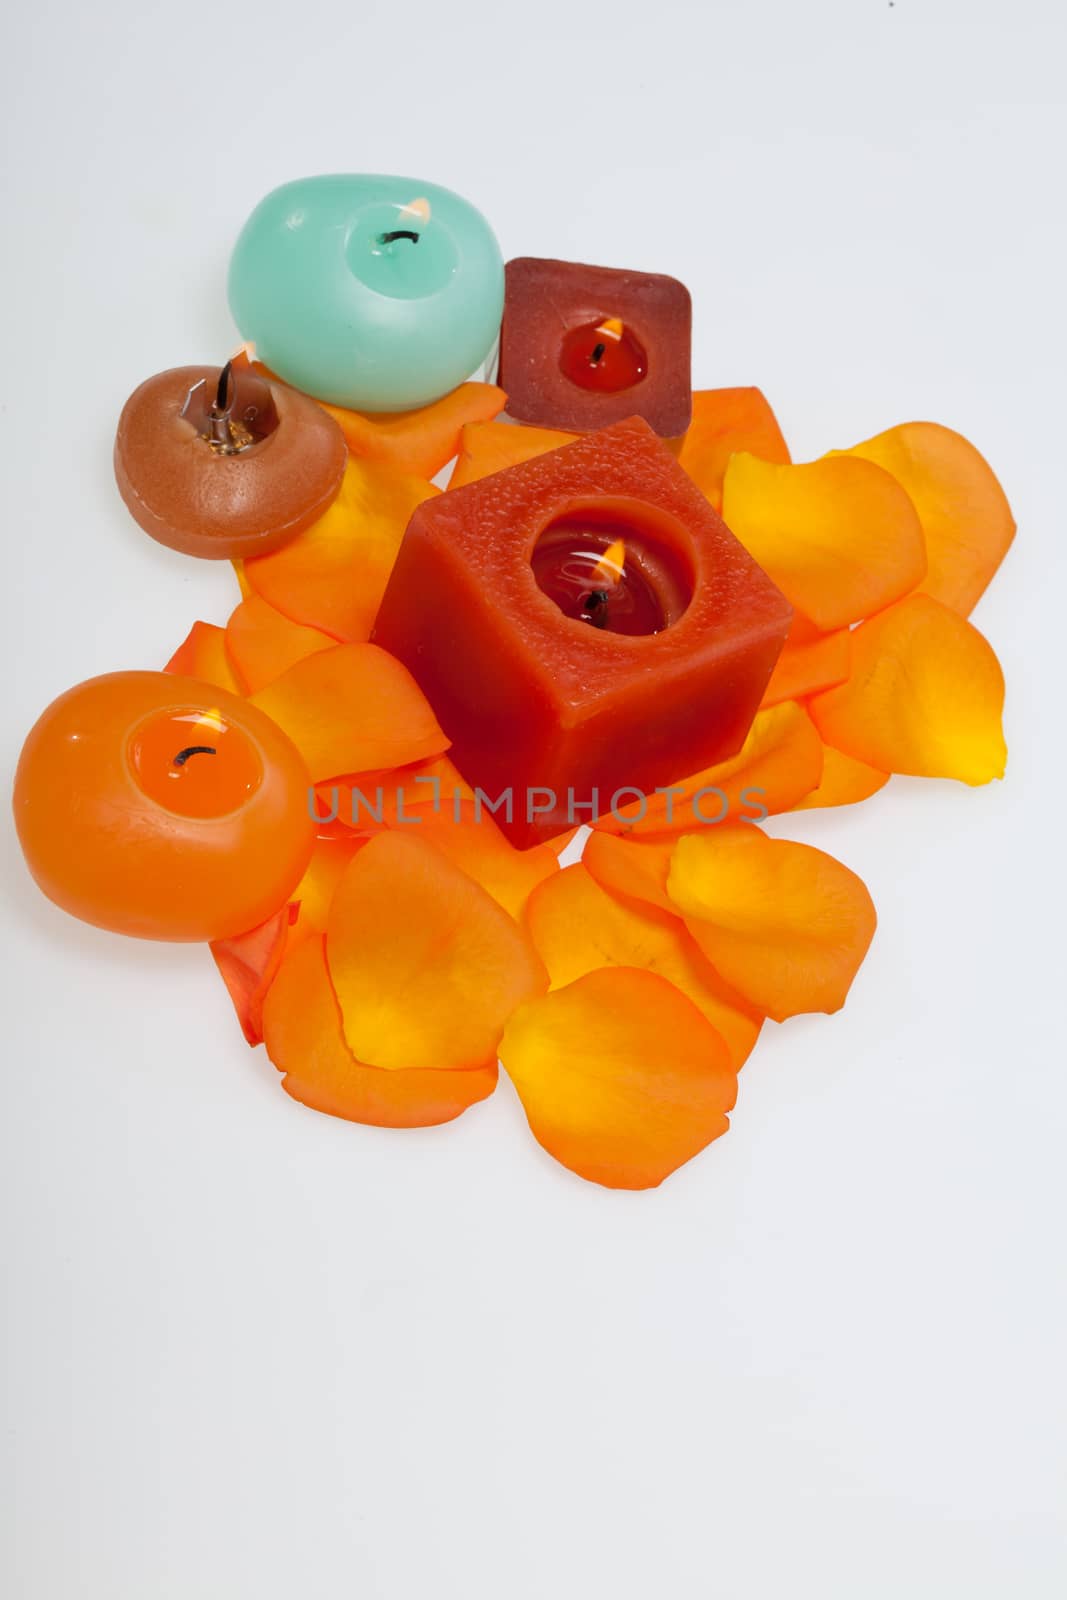 Spilt petals of the orange-rose around the aromatic candle by wjarek